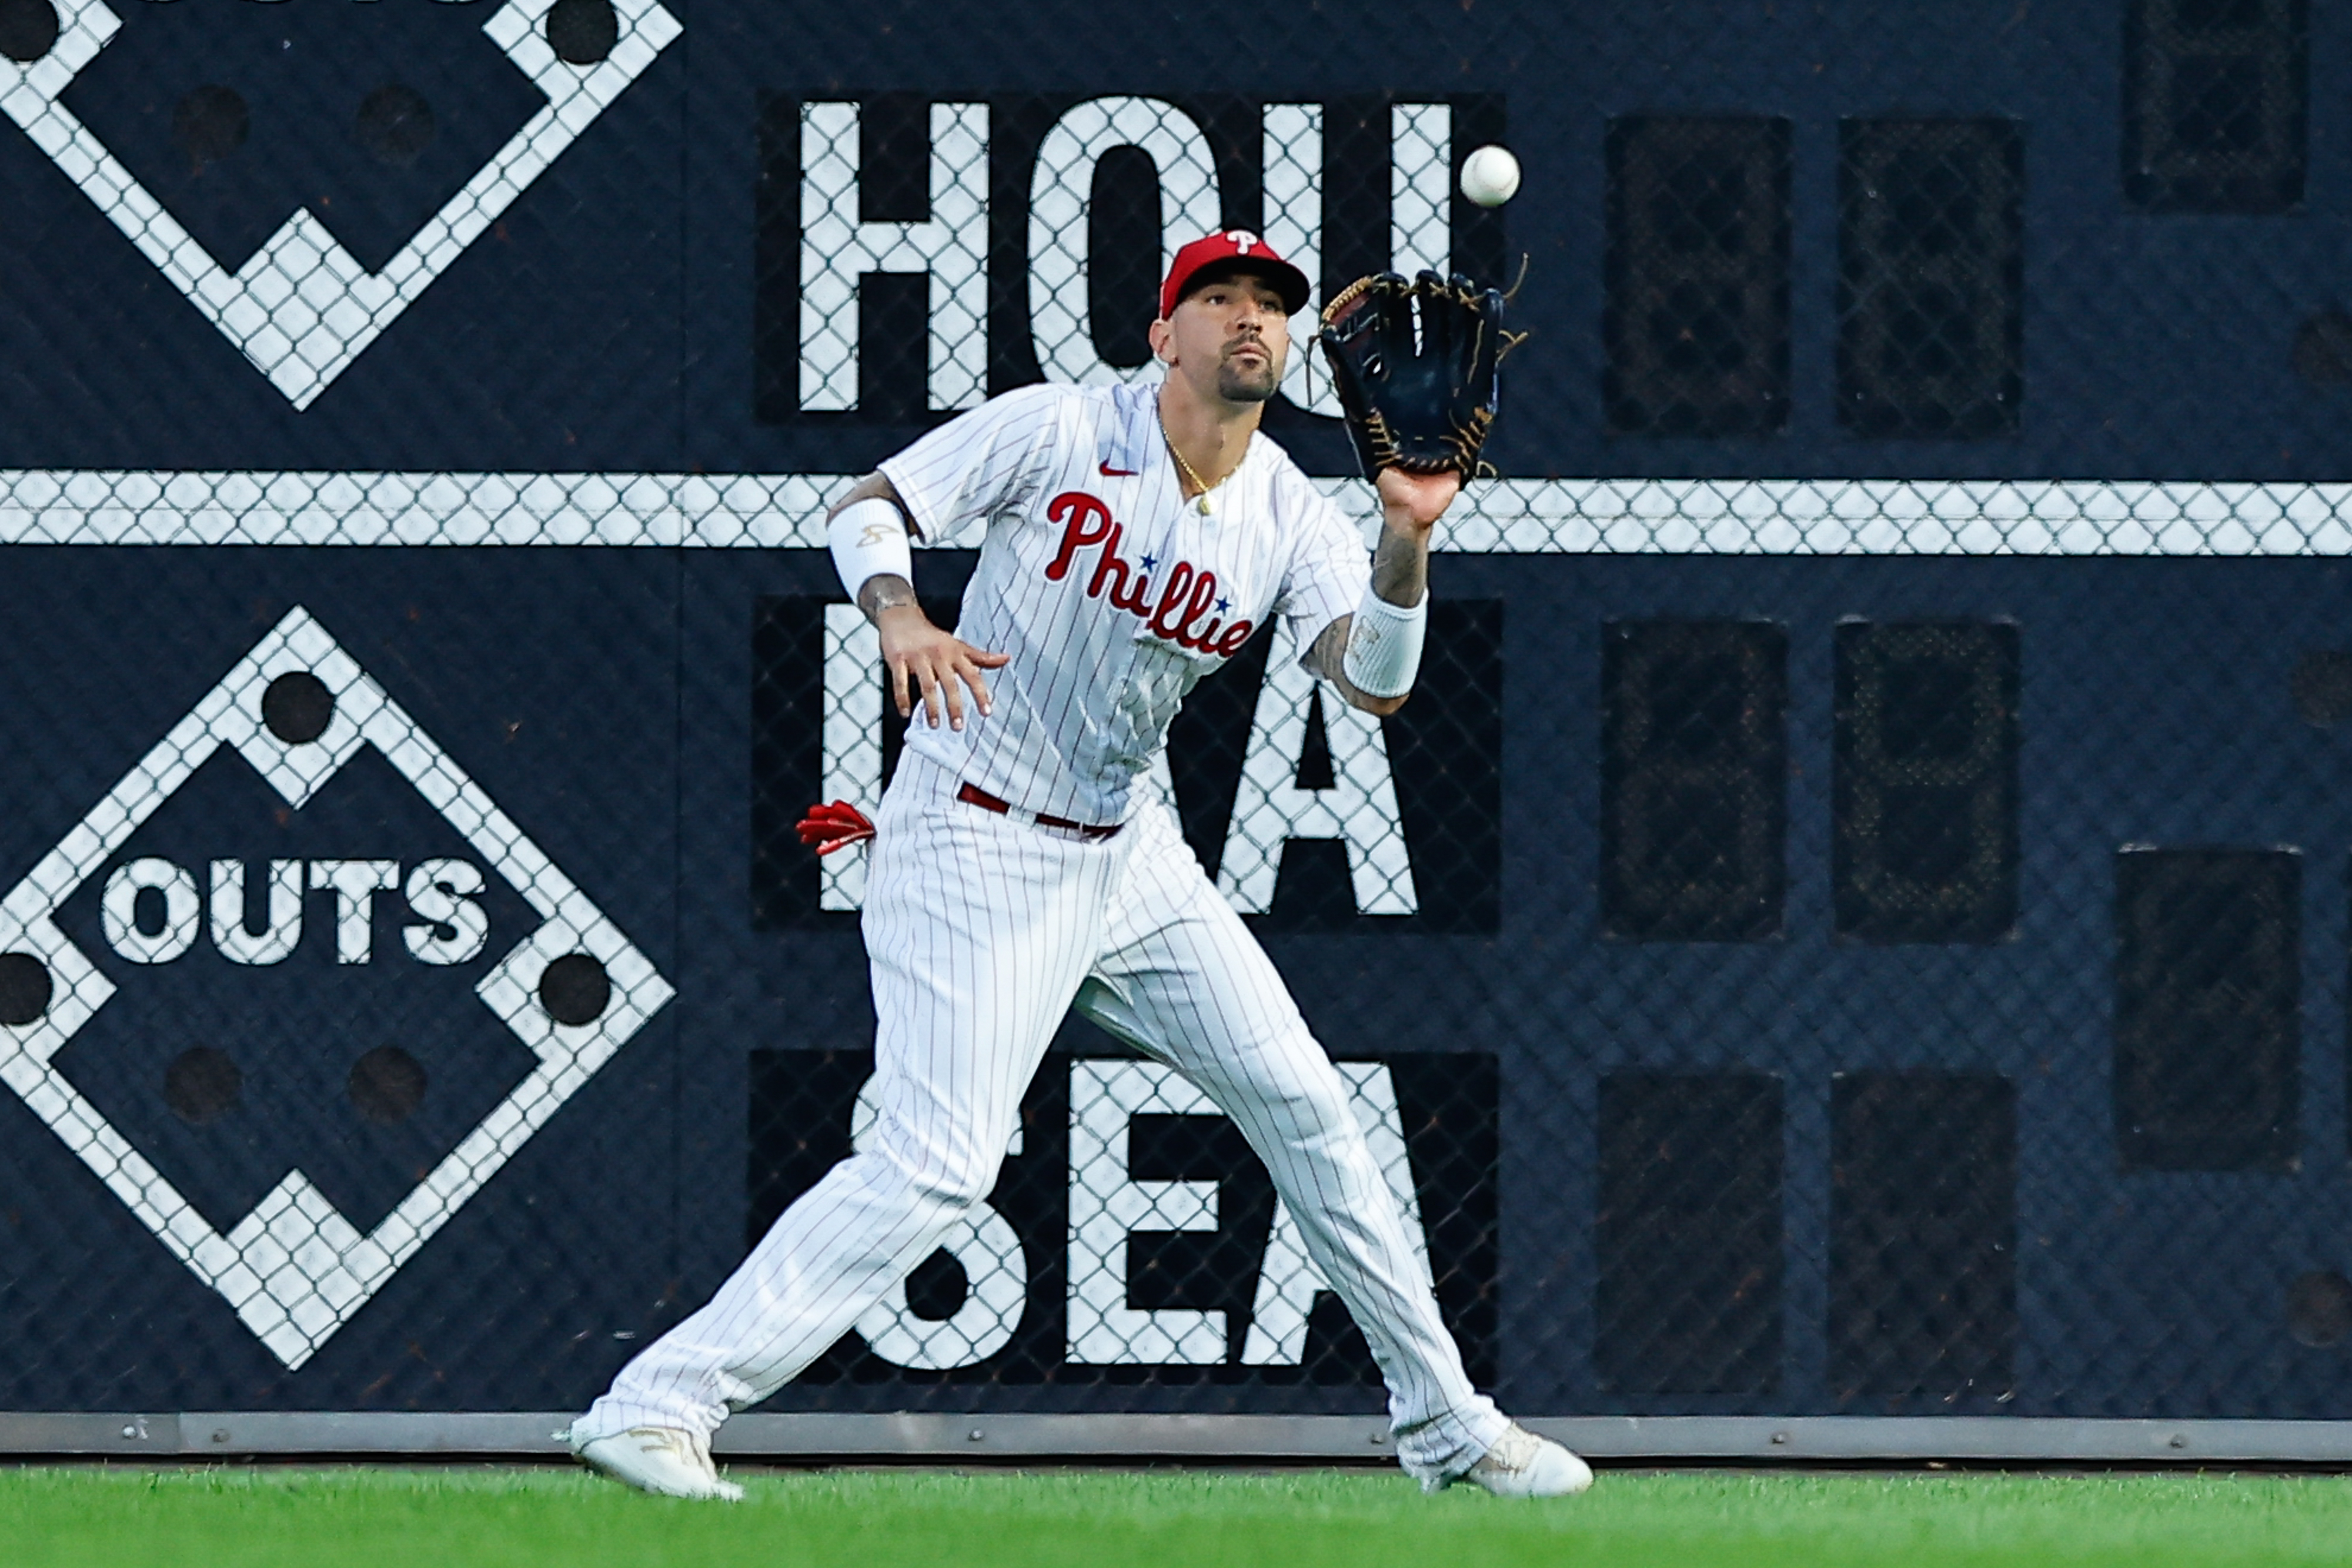 Shane Victorino's slam leads Phillies in 5-2 NLDS win over Brewers